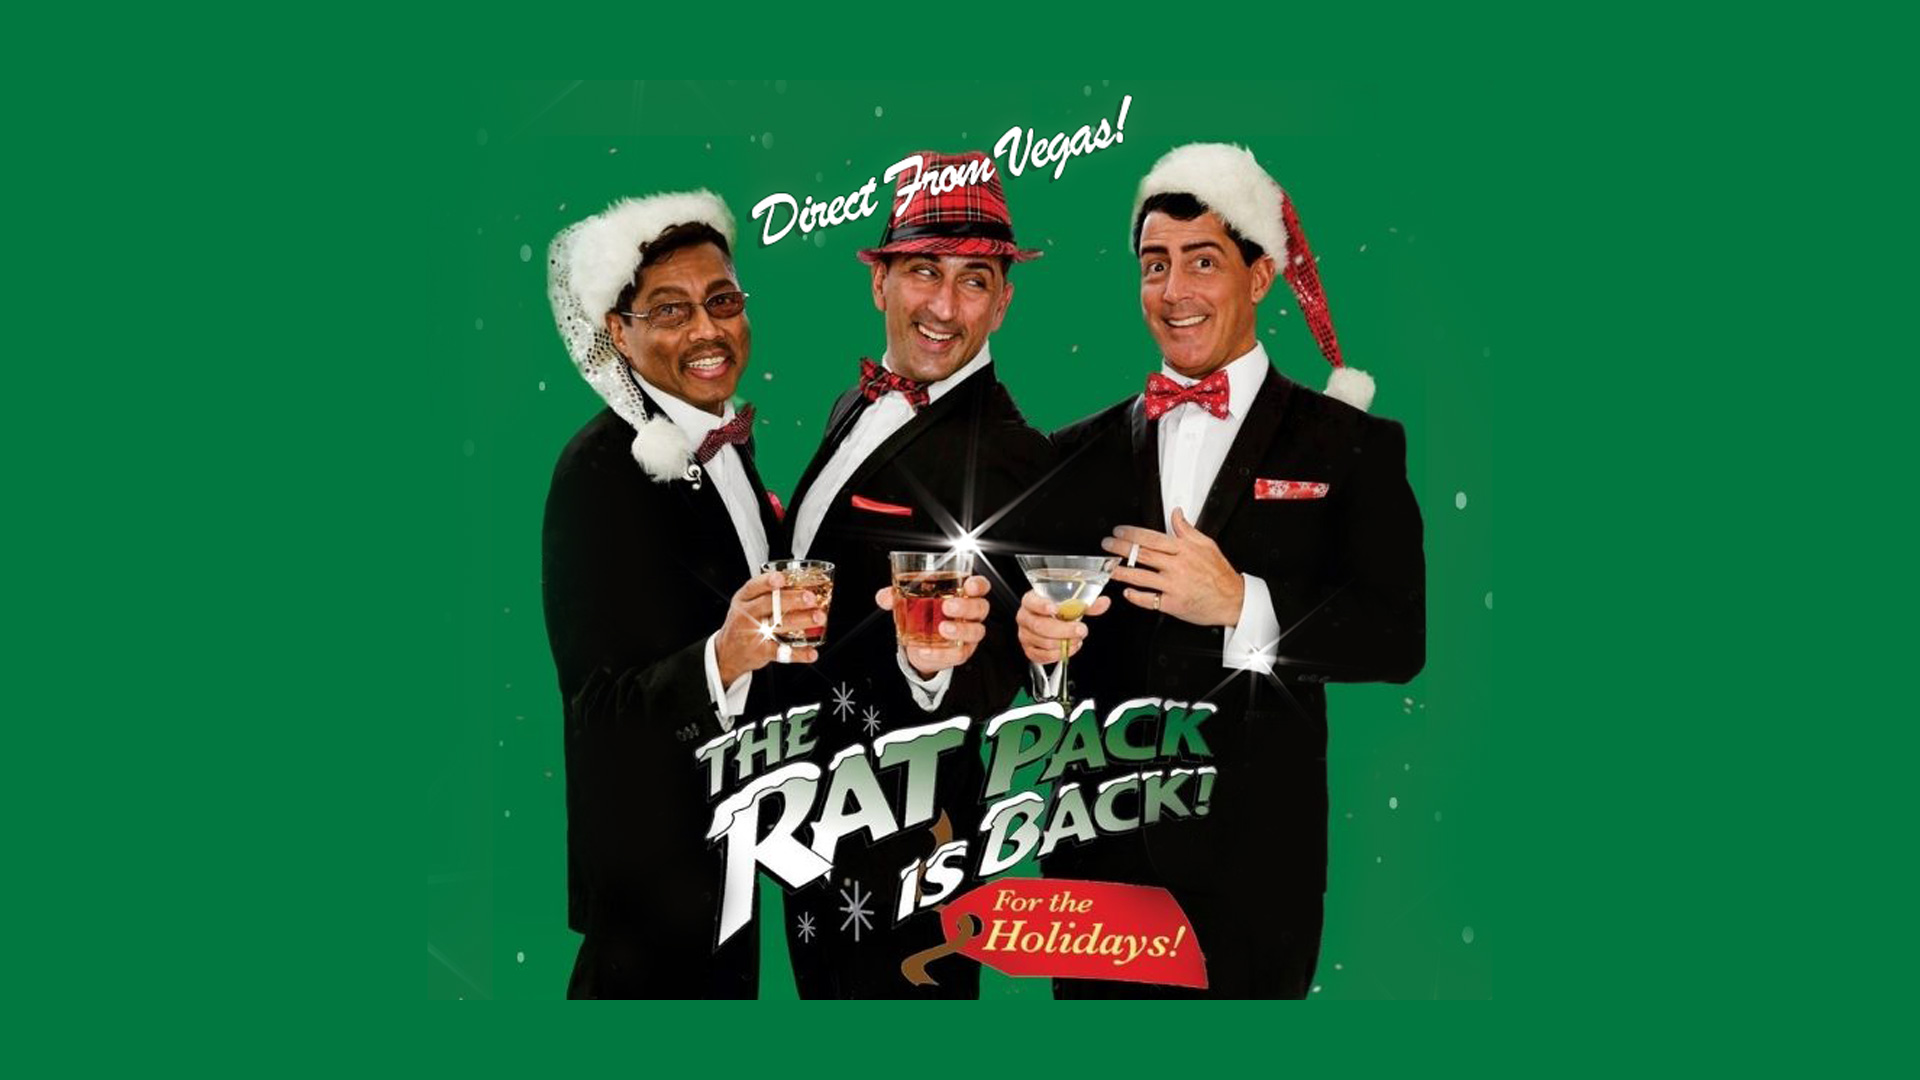 The Rat Pack Is Back - Holiday Show